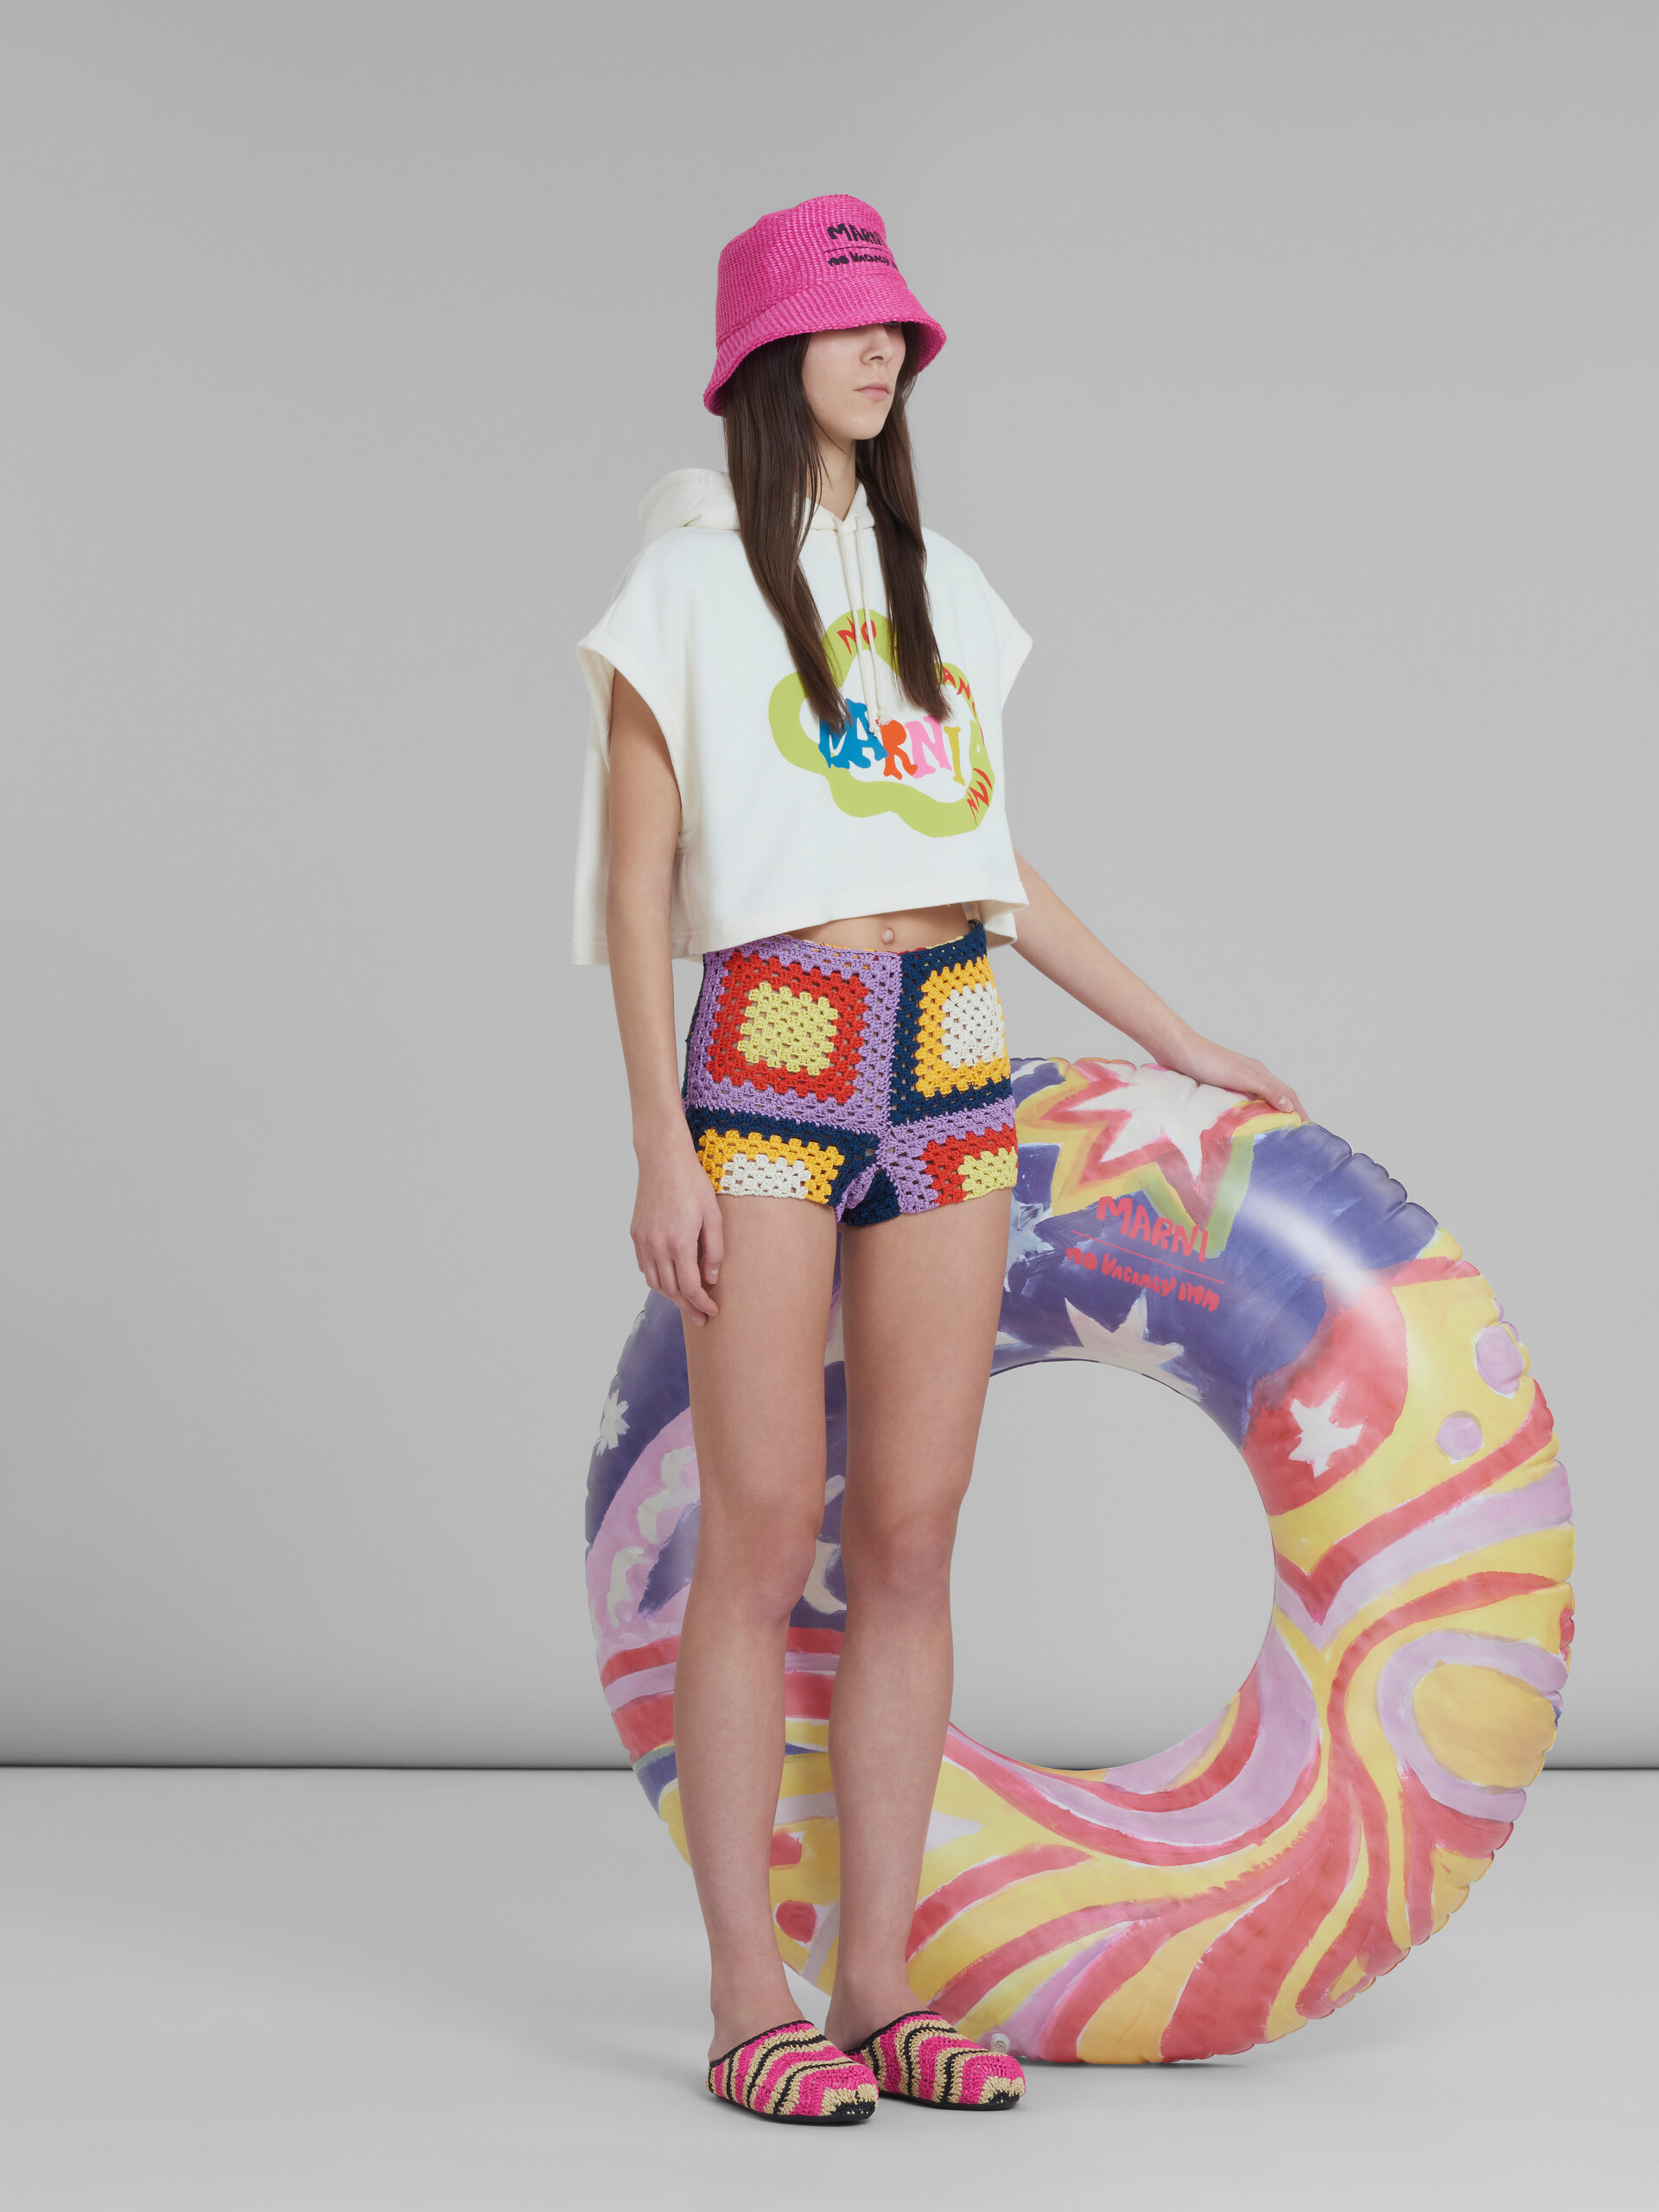 Marni x No Vacancy Inn - Inflatable ring with Galactic Paradise print - Other accessories - Image 5